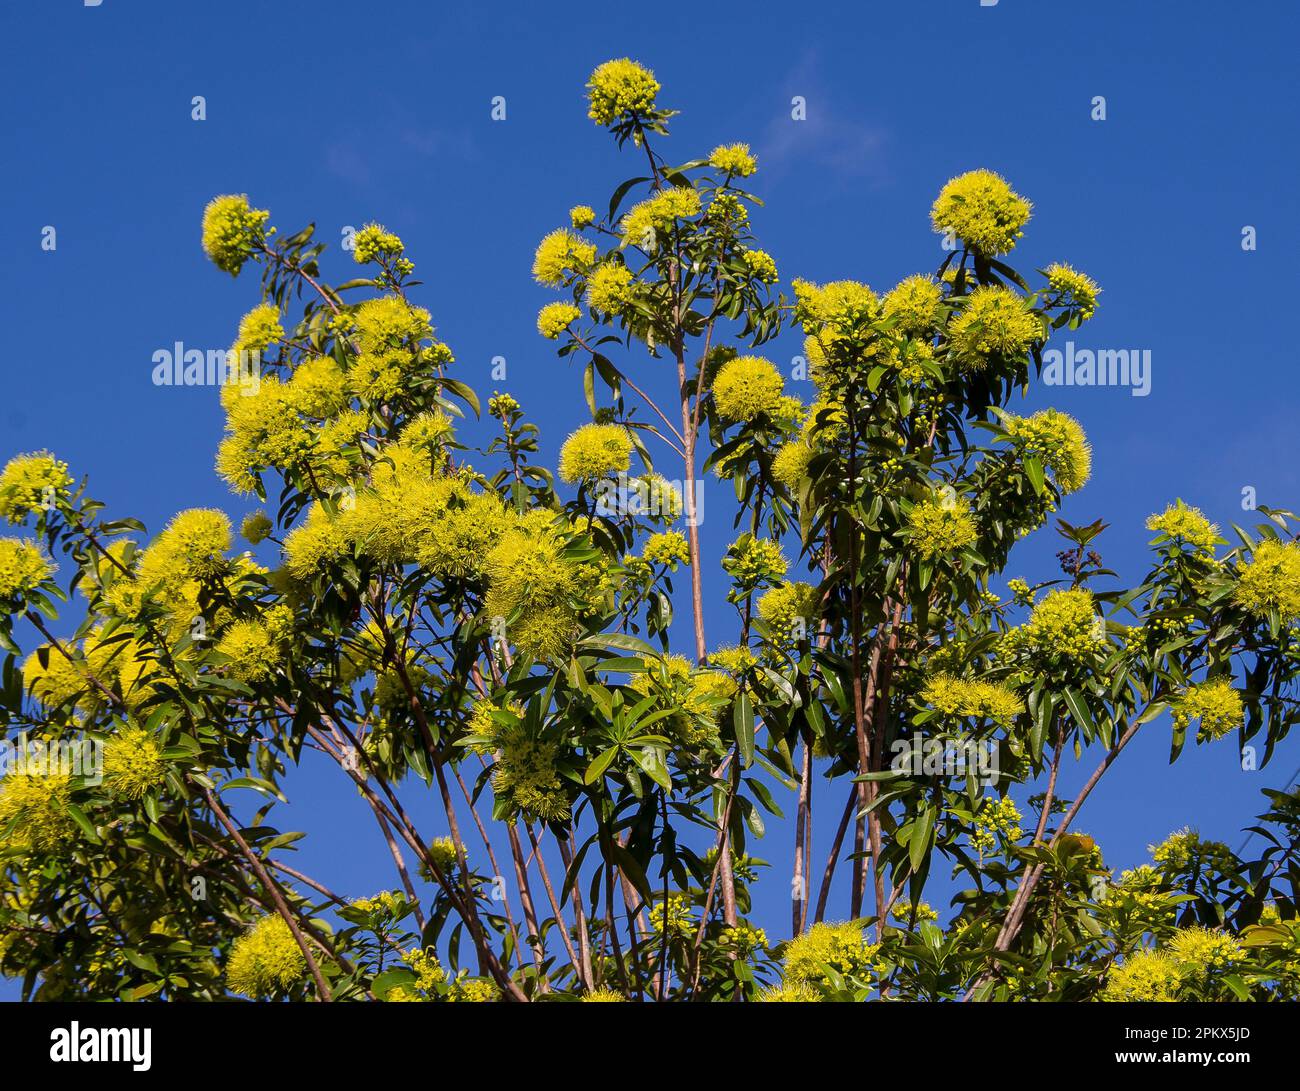 Upper branches of Australian Golden Penda tree (xanthostemon chrysanthus) full of bright yellow fowers against a blue sky. Garden, Queensland, summer. Stock Photo